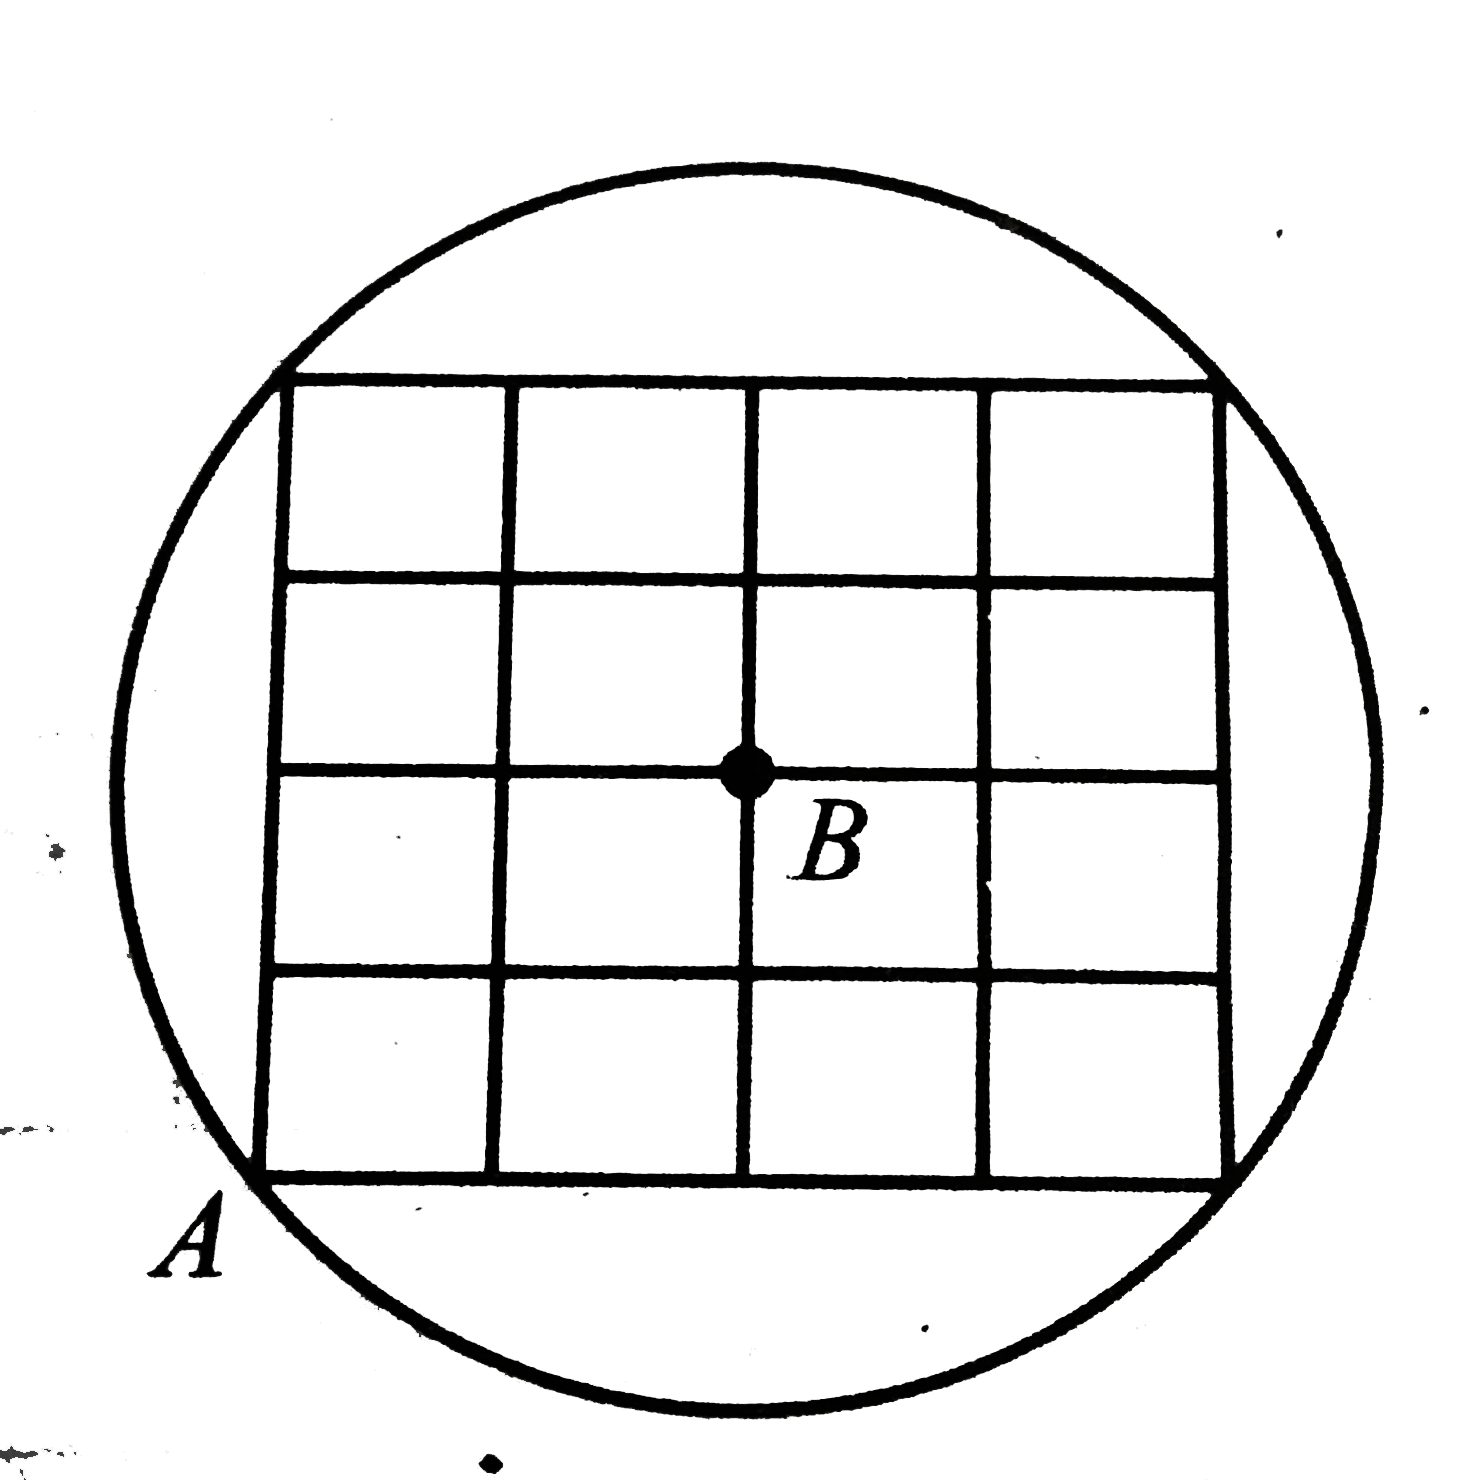 A finite square grid, each link having resistance r, is fitted in a resistance less conducing circular wire. Determine the equivalenet resistance between A and B (